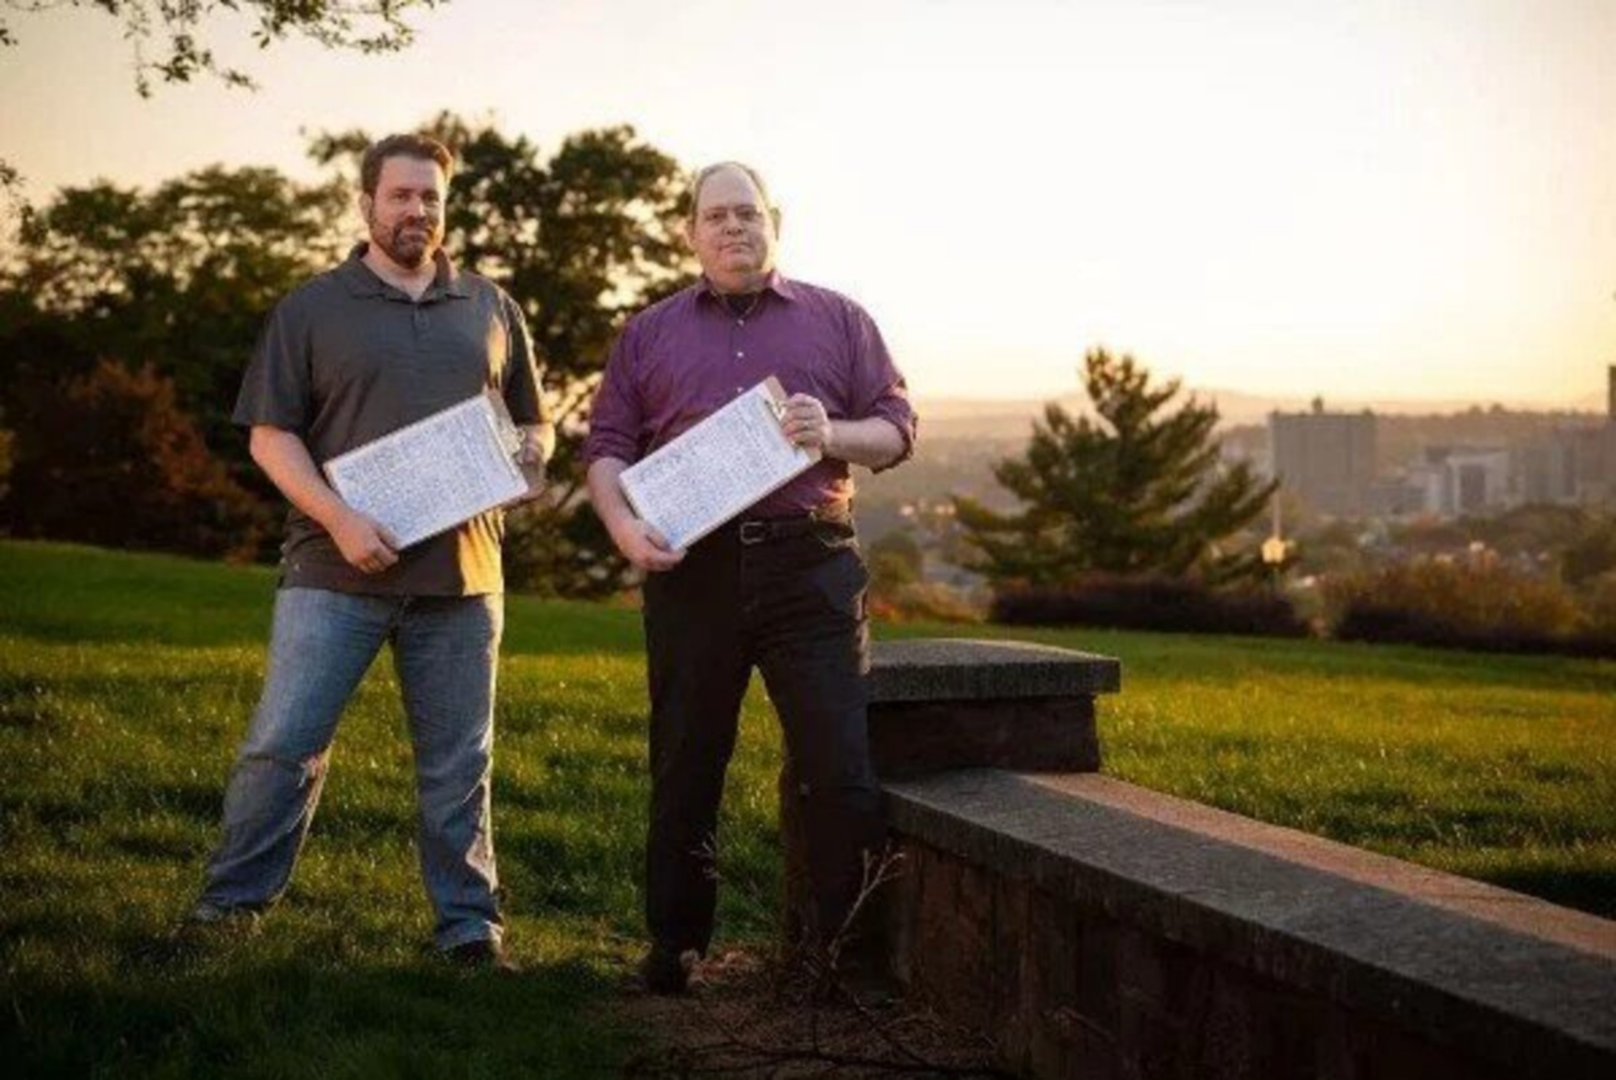 Keystone Party candidate Dave Kocur (right) and board member Kevin Gaughen (left) were told to leave Fort Hunter Park for distributing a petition. (Photo courtesy of Timothy Scott Kerns)